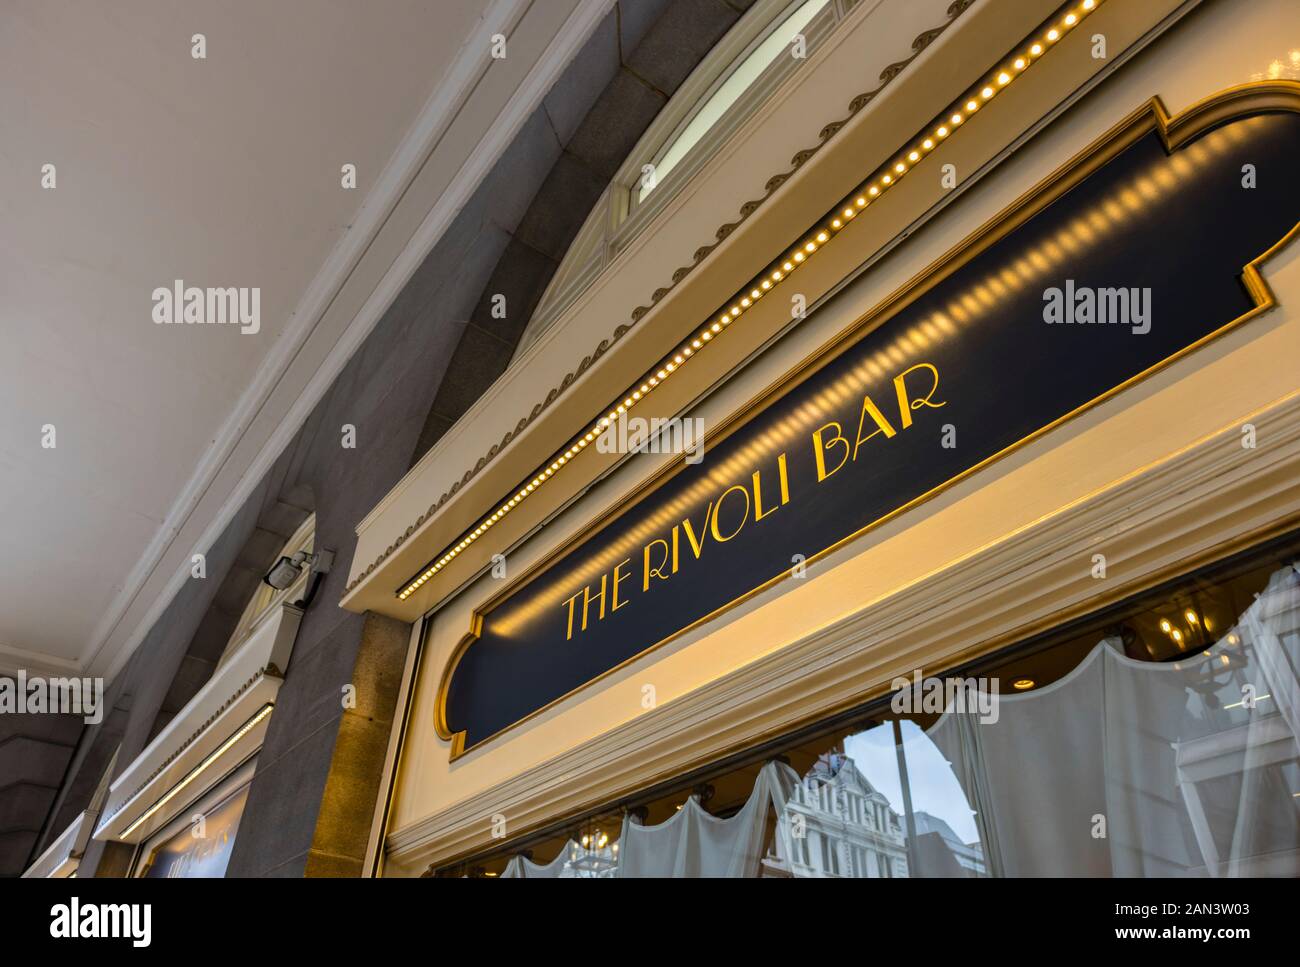 Name sign outside the Rivoli Bar, a popular up-market cocktail bar and lounge for drinks in the iconic Ritz Hotel, Piccadilly, London W1 Stock Photo